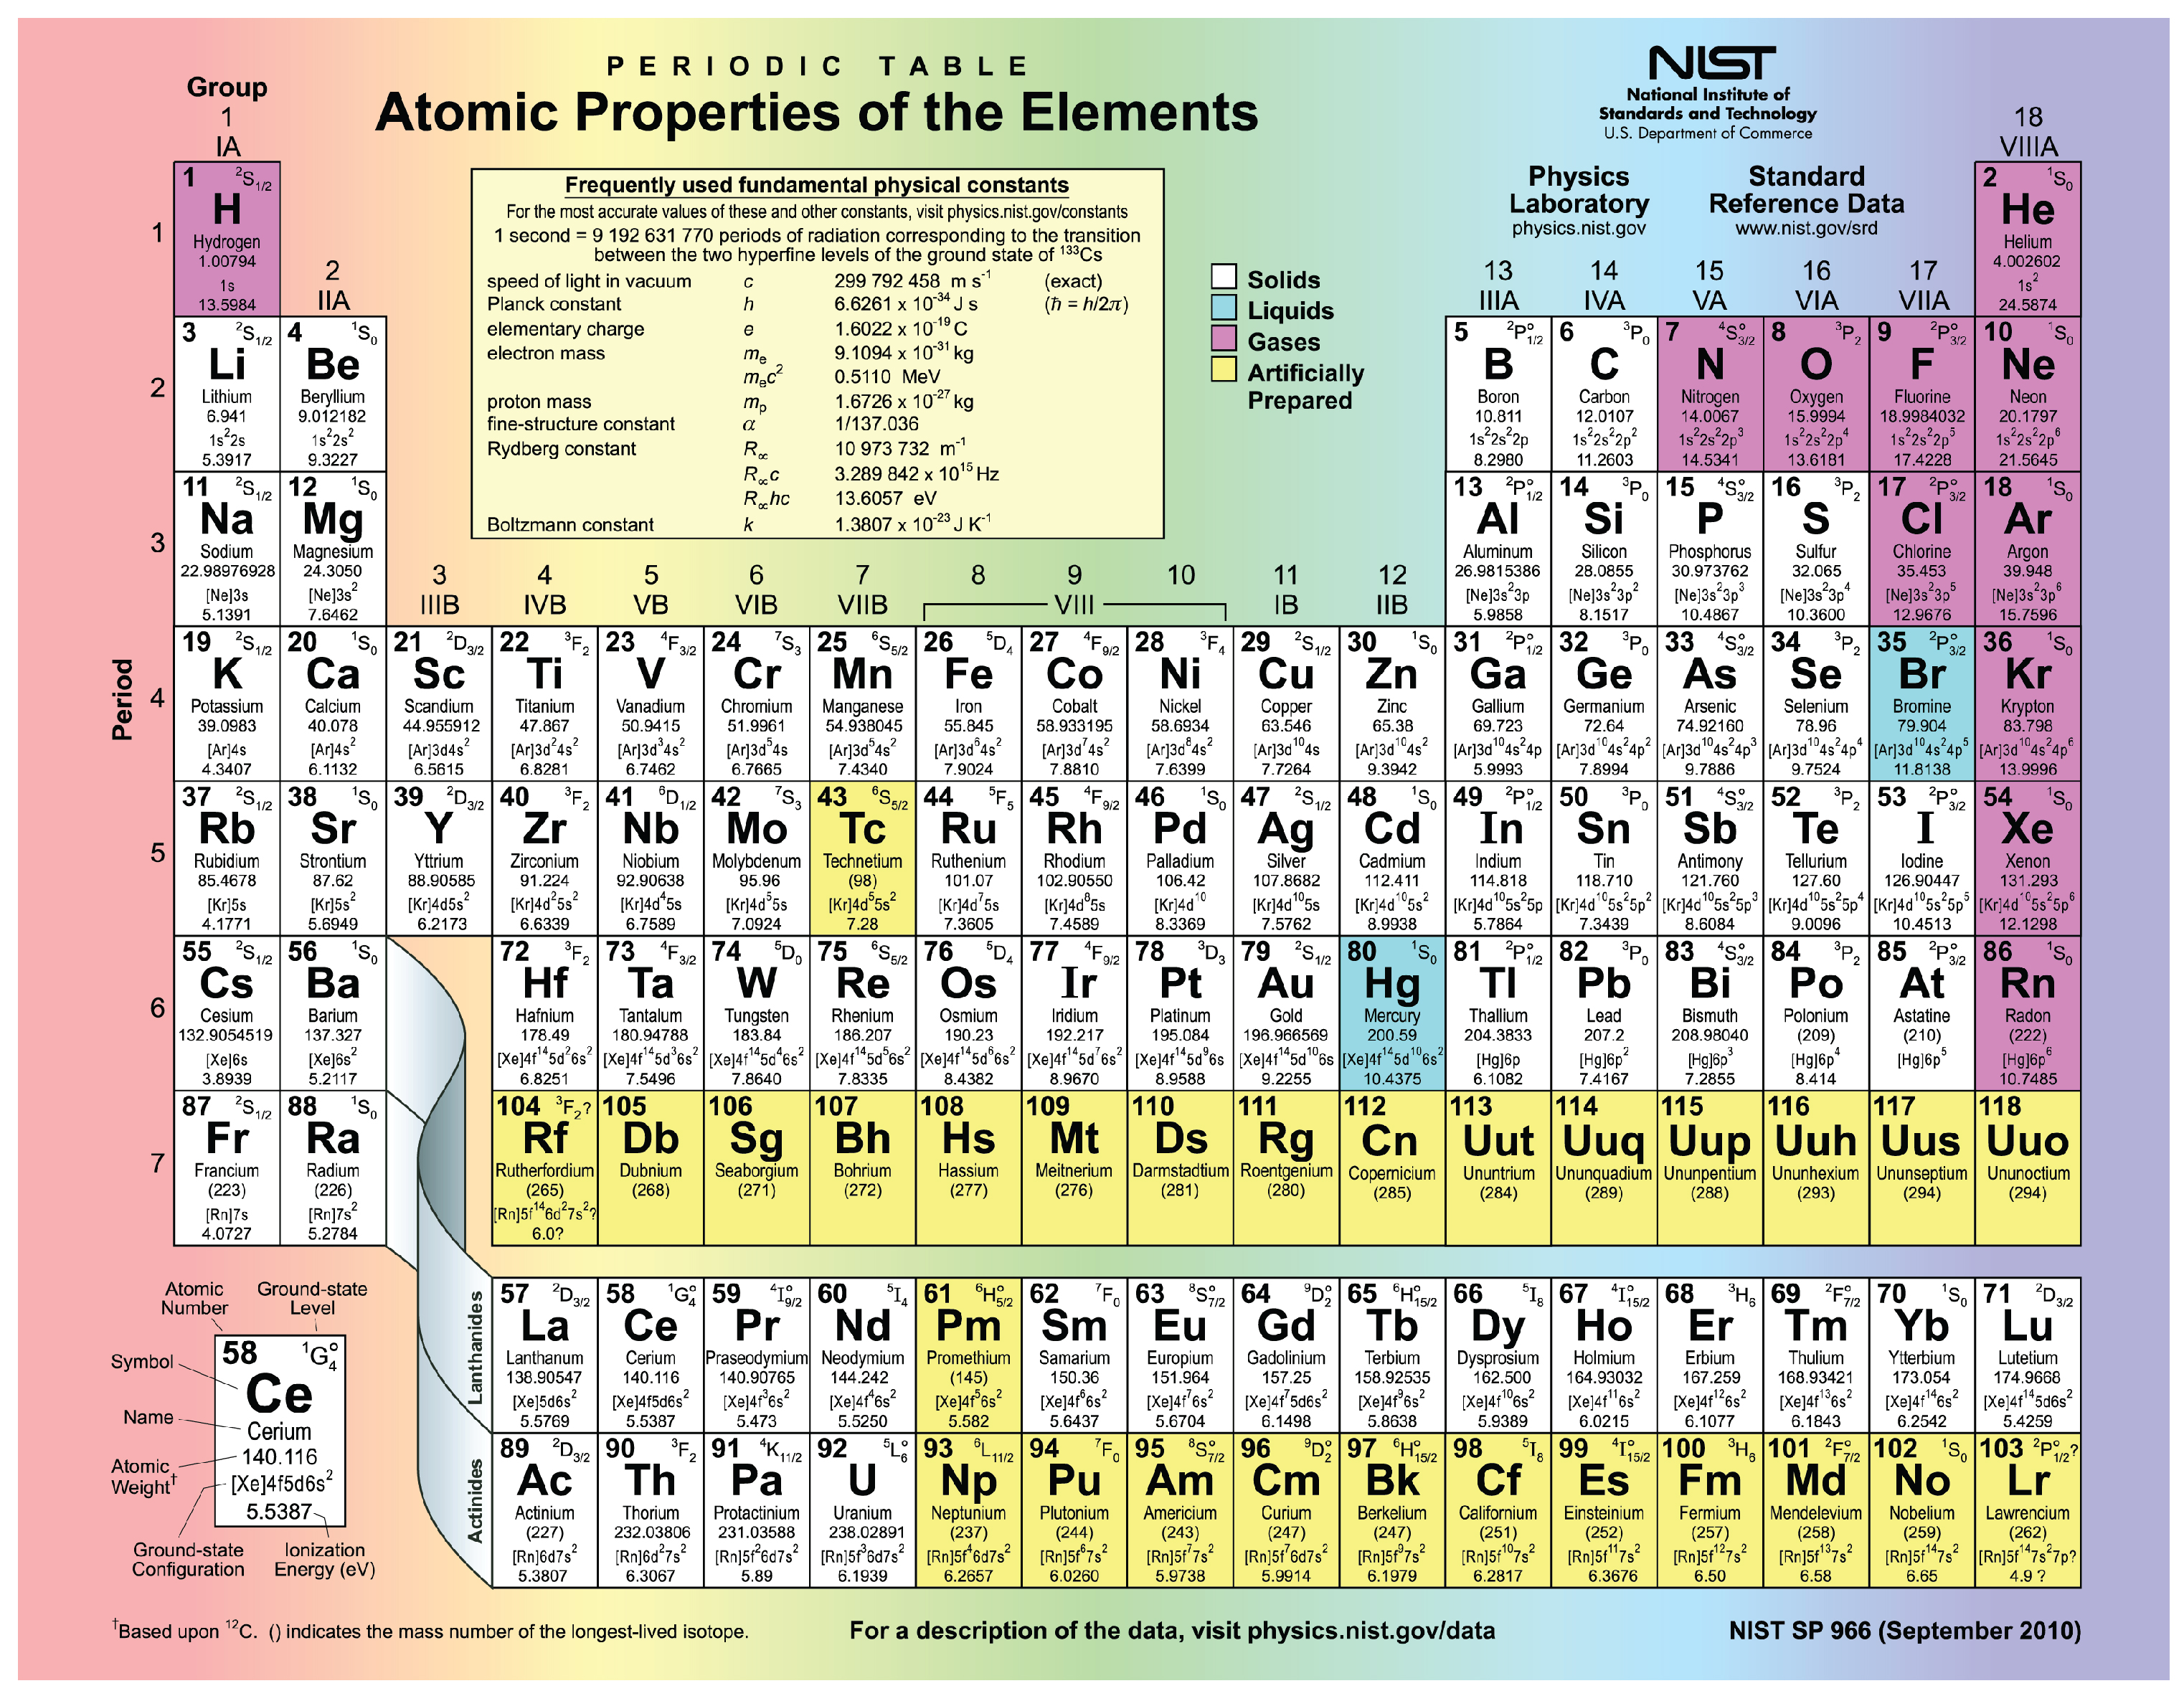 This figure shows the periodic table.